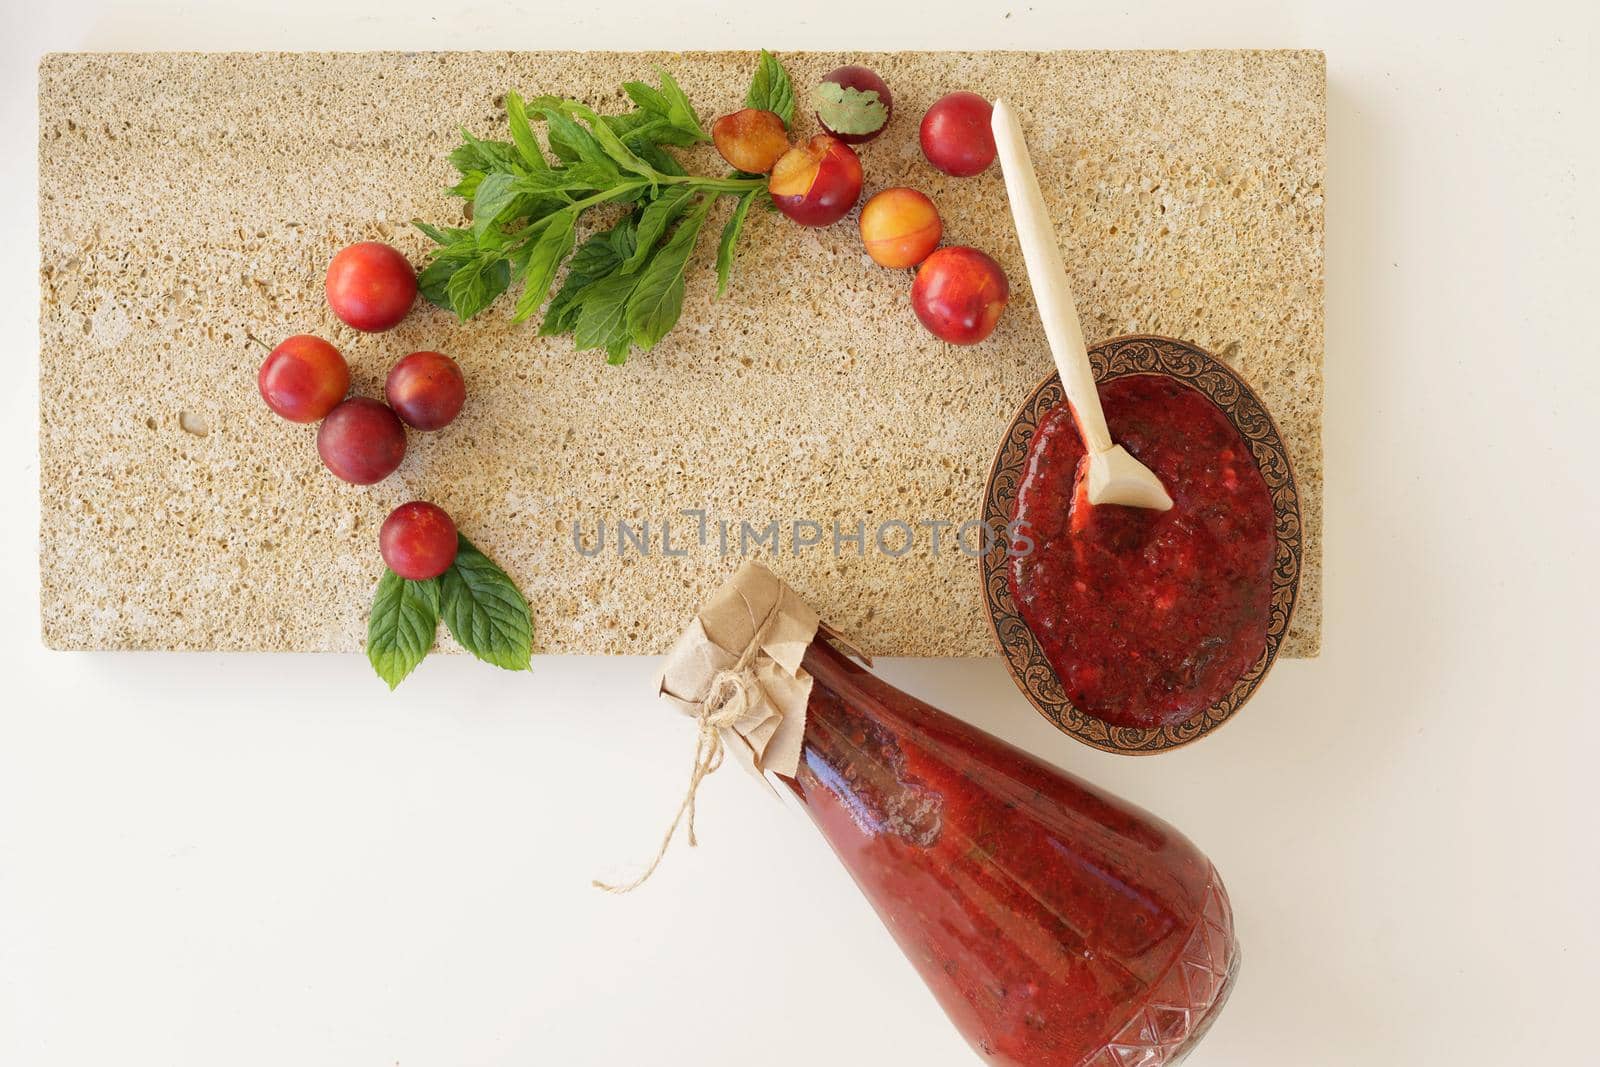 Georgian tkemali sauce with ingredients on stone table. by Proxima13